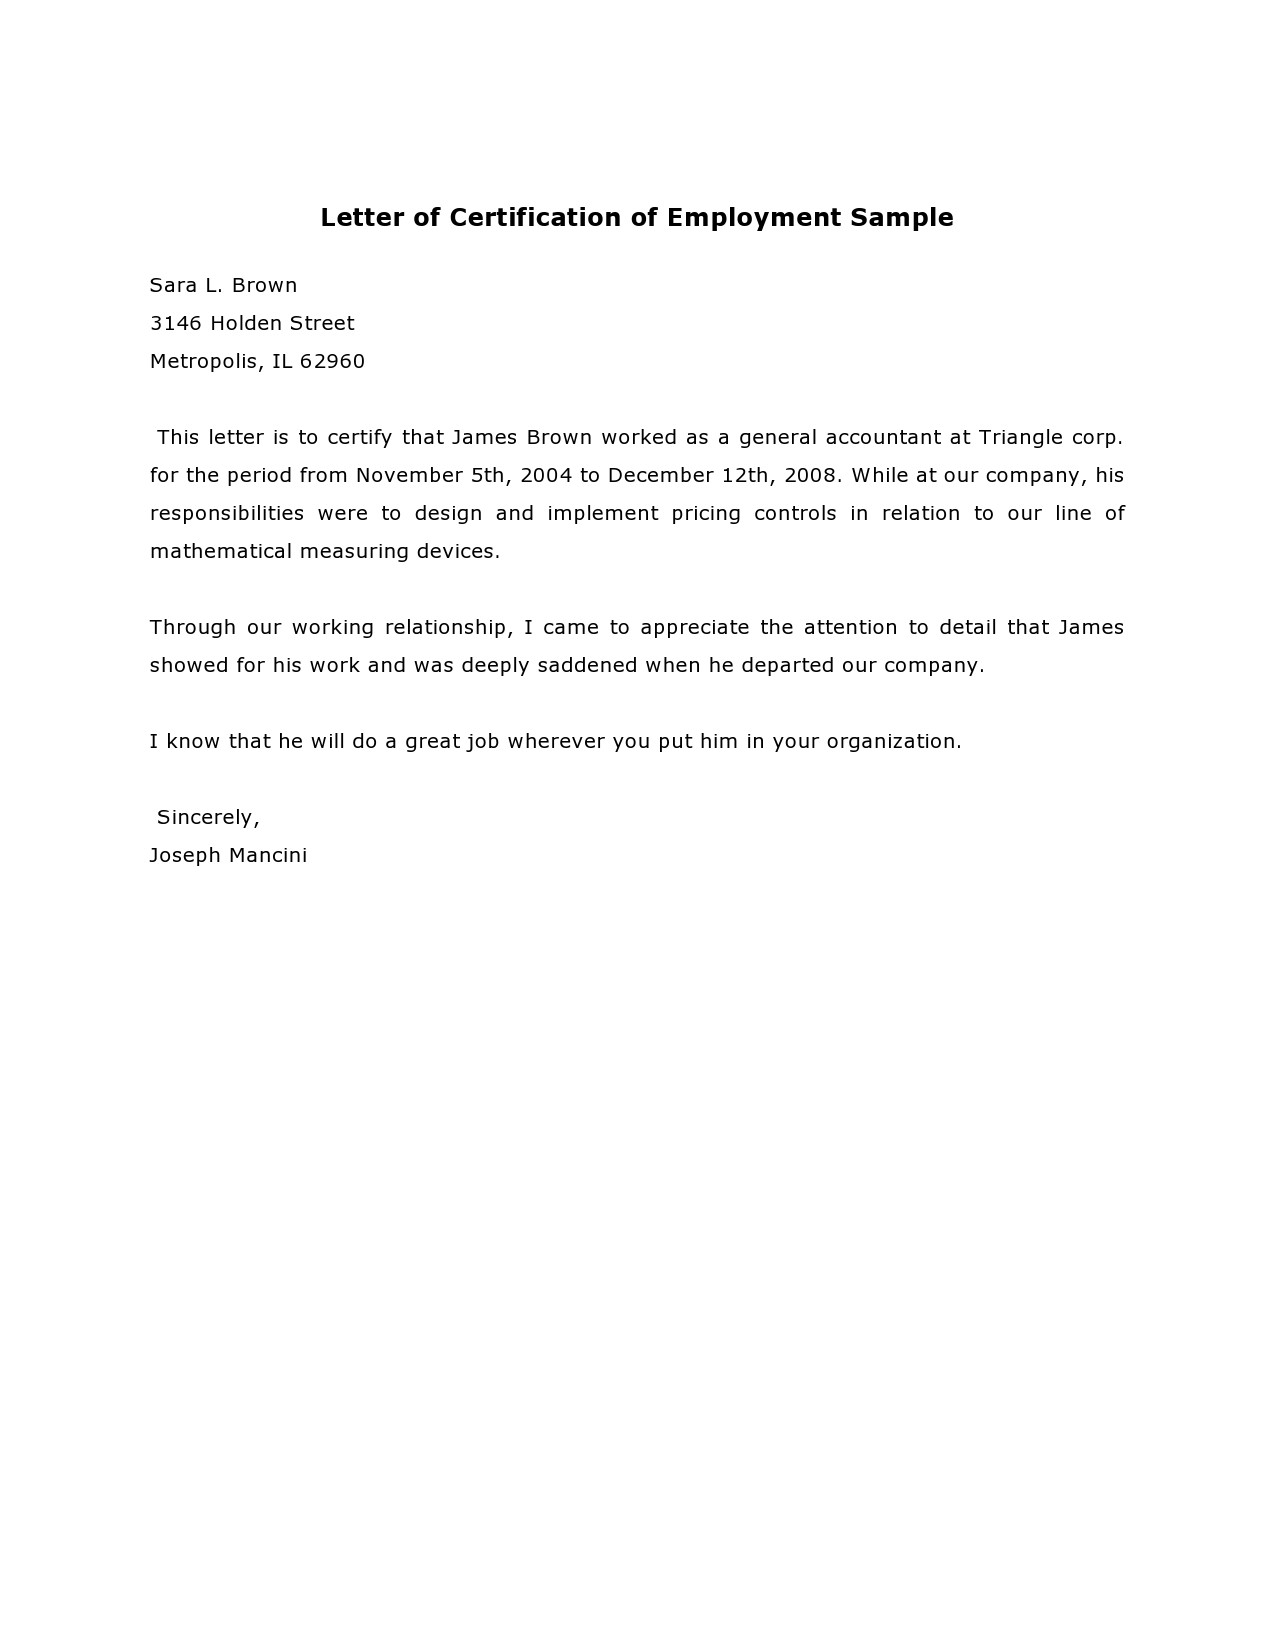 certificate of employment template, free printable employment certificate template, free employment certificate template word, employment separation certificate template, employment certificate format in word, employment certificate letter template, certificate of employment with compensation template, certificate of employment with salary template, visa certificate of employment template